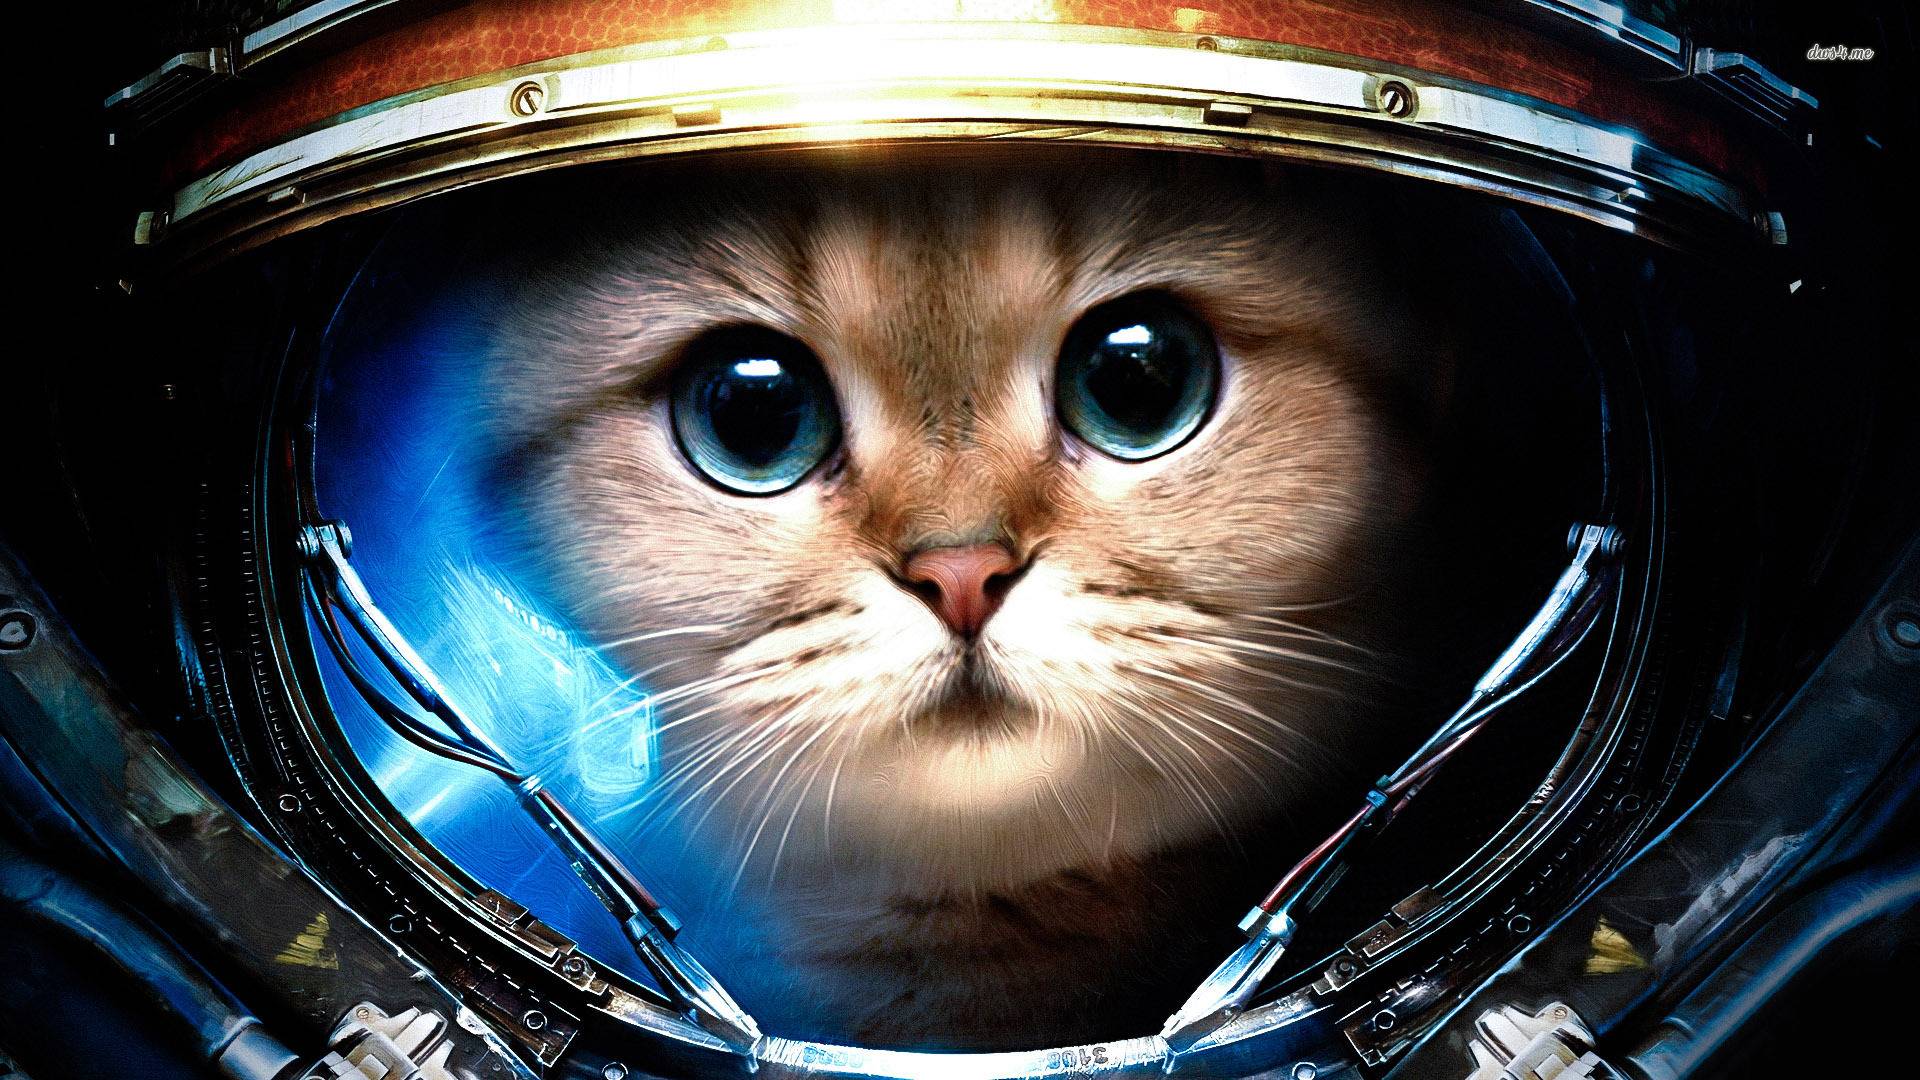 SPACE CAT He is going to be the first cat to walk on the moon XD 1920x1080